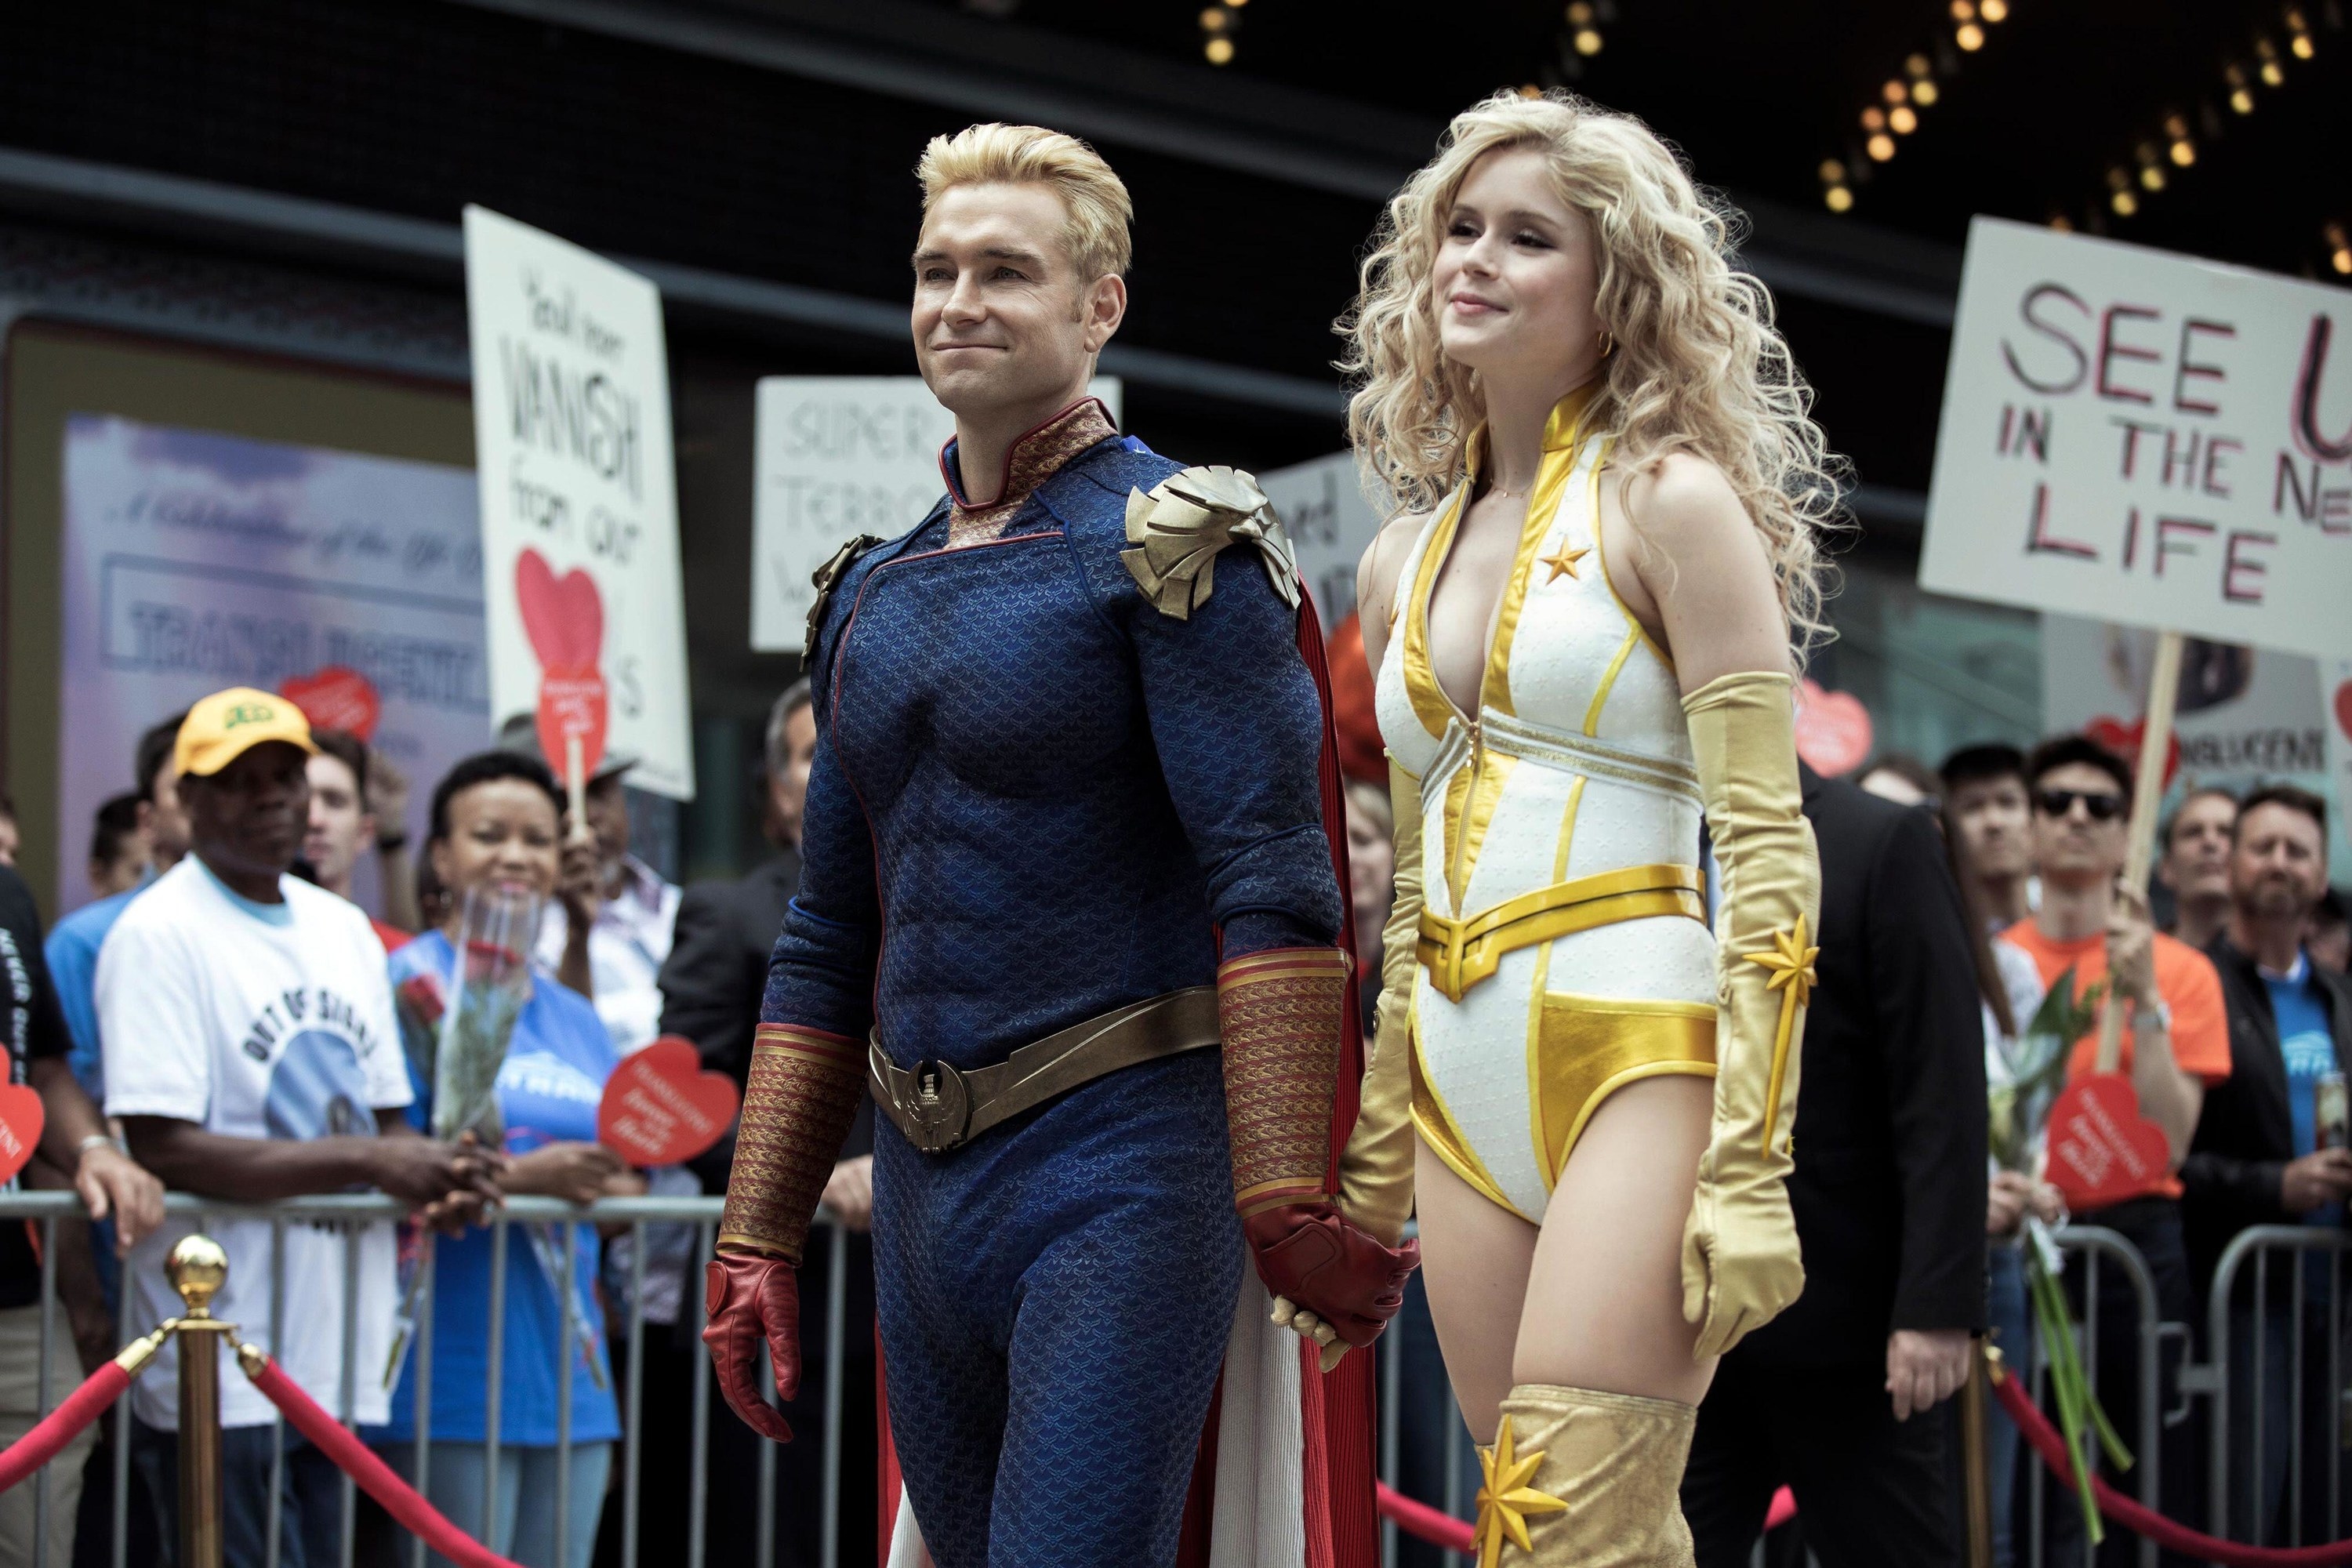 Two superheroes publicly hold hands while walking to an anticipated event